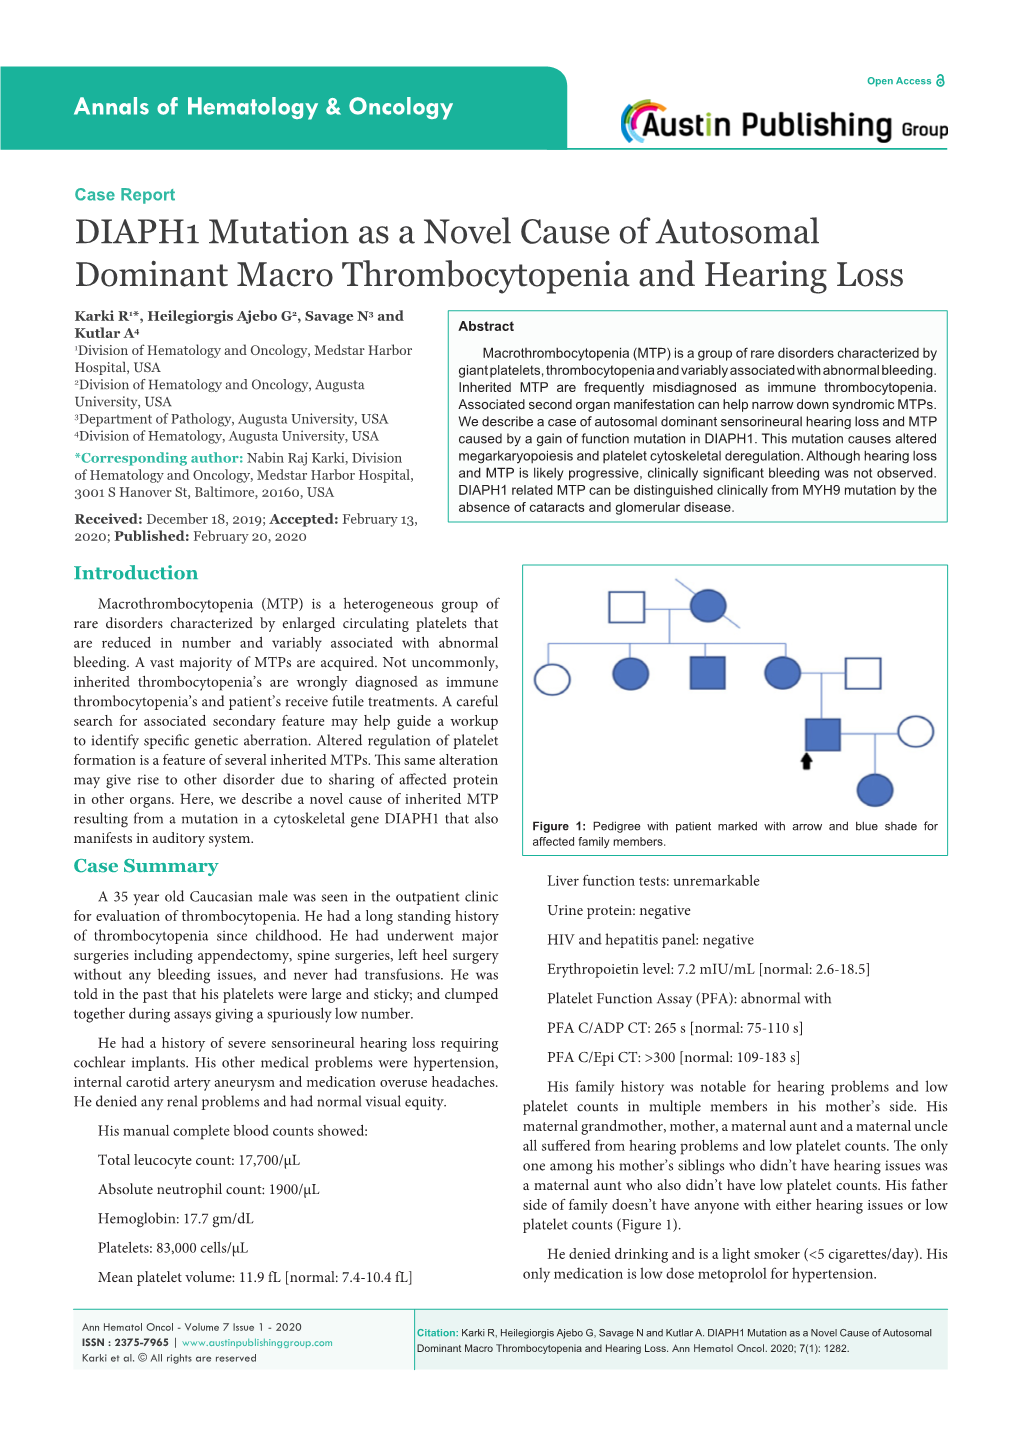 DIAPH1 Mutation As a Novel Cause of Autosomal Dominant Macro Thrombocytopenia and Hearing Loss